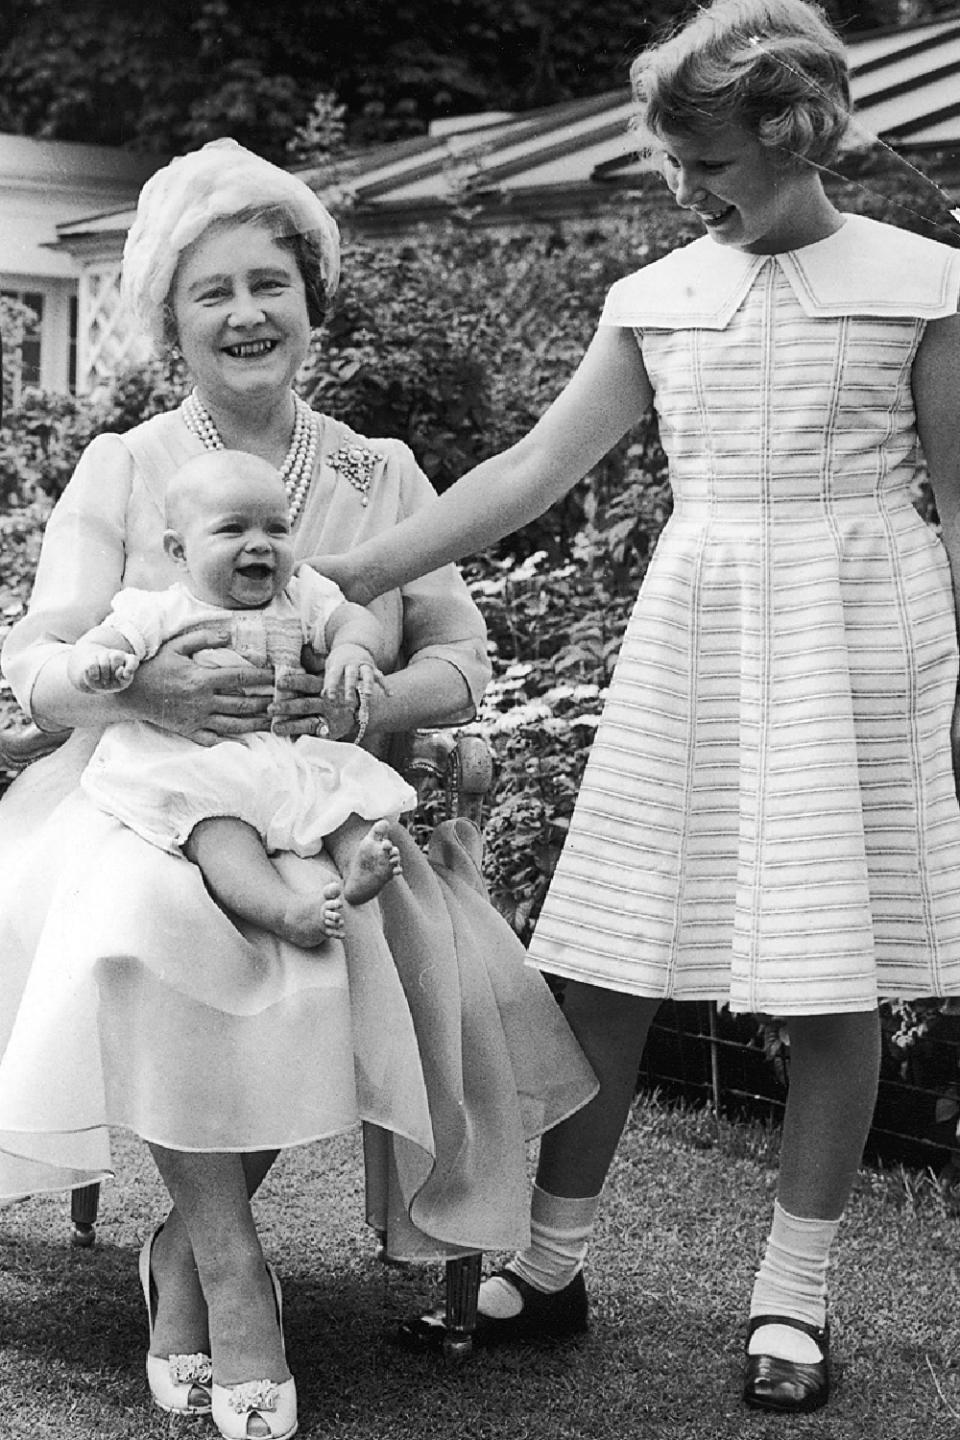 Male royal babies used to wear dresses